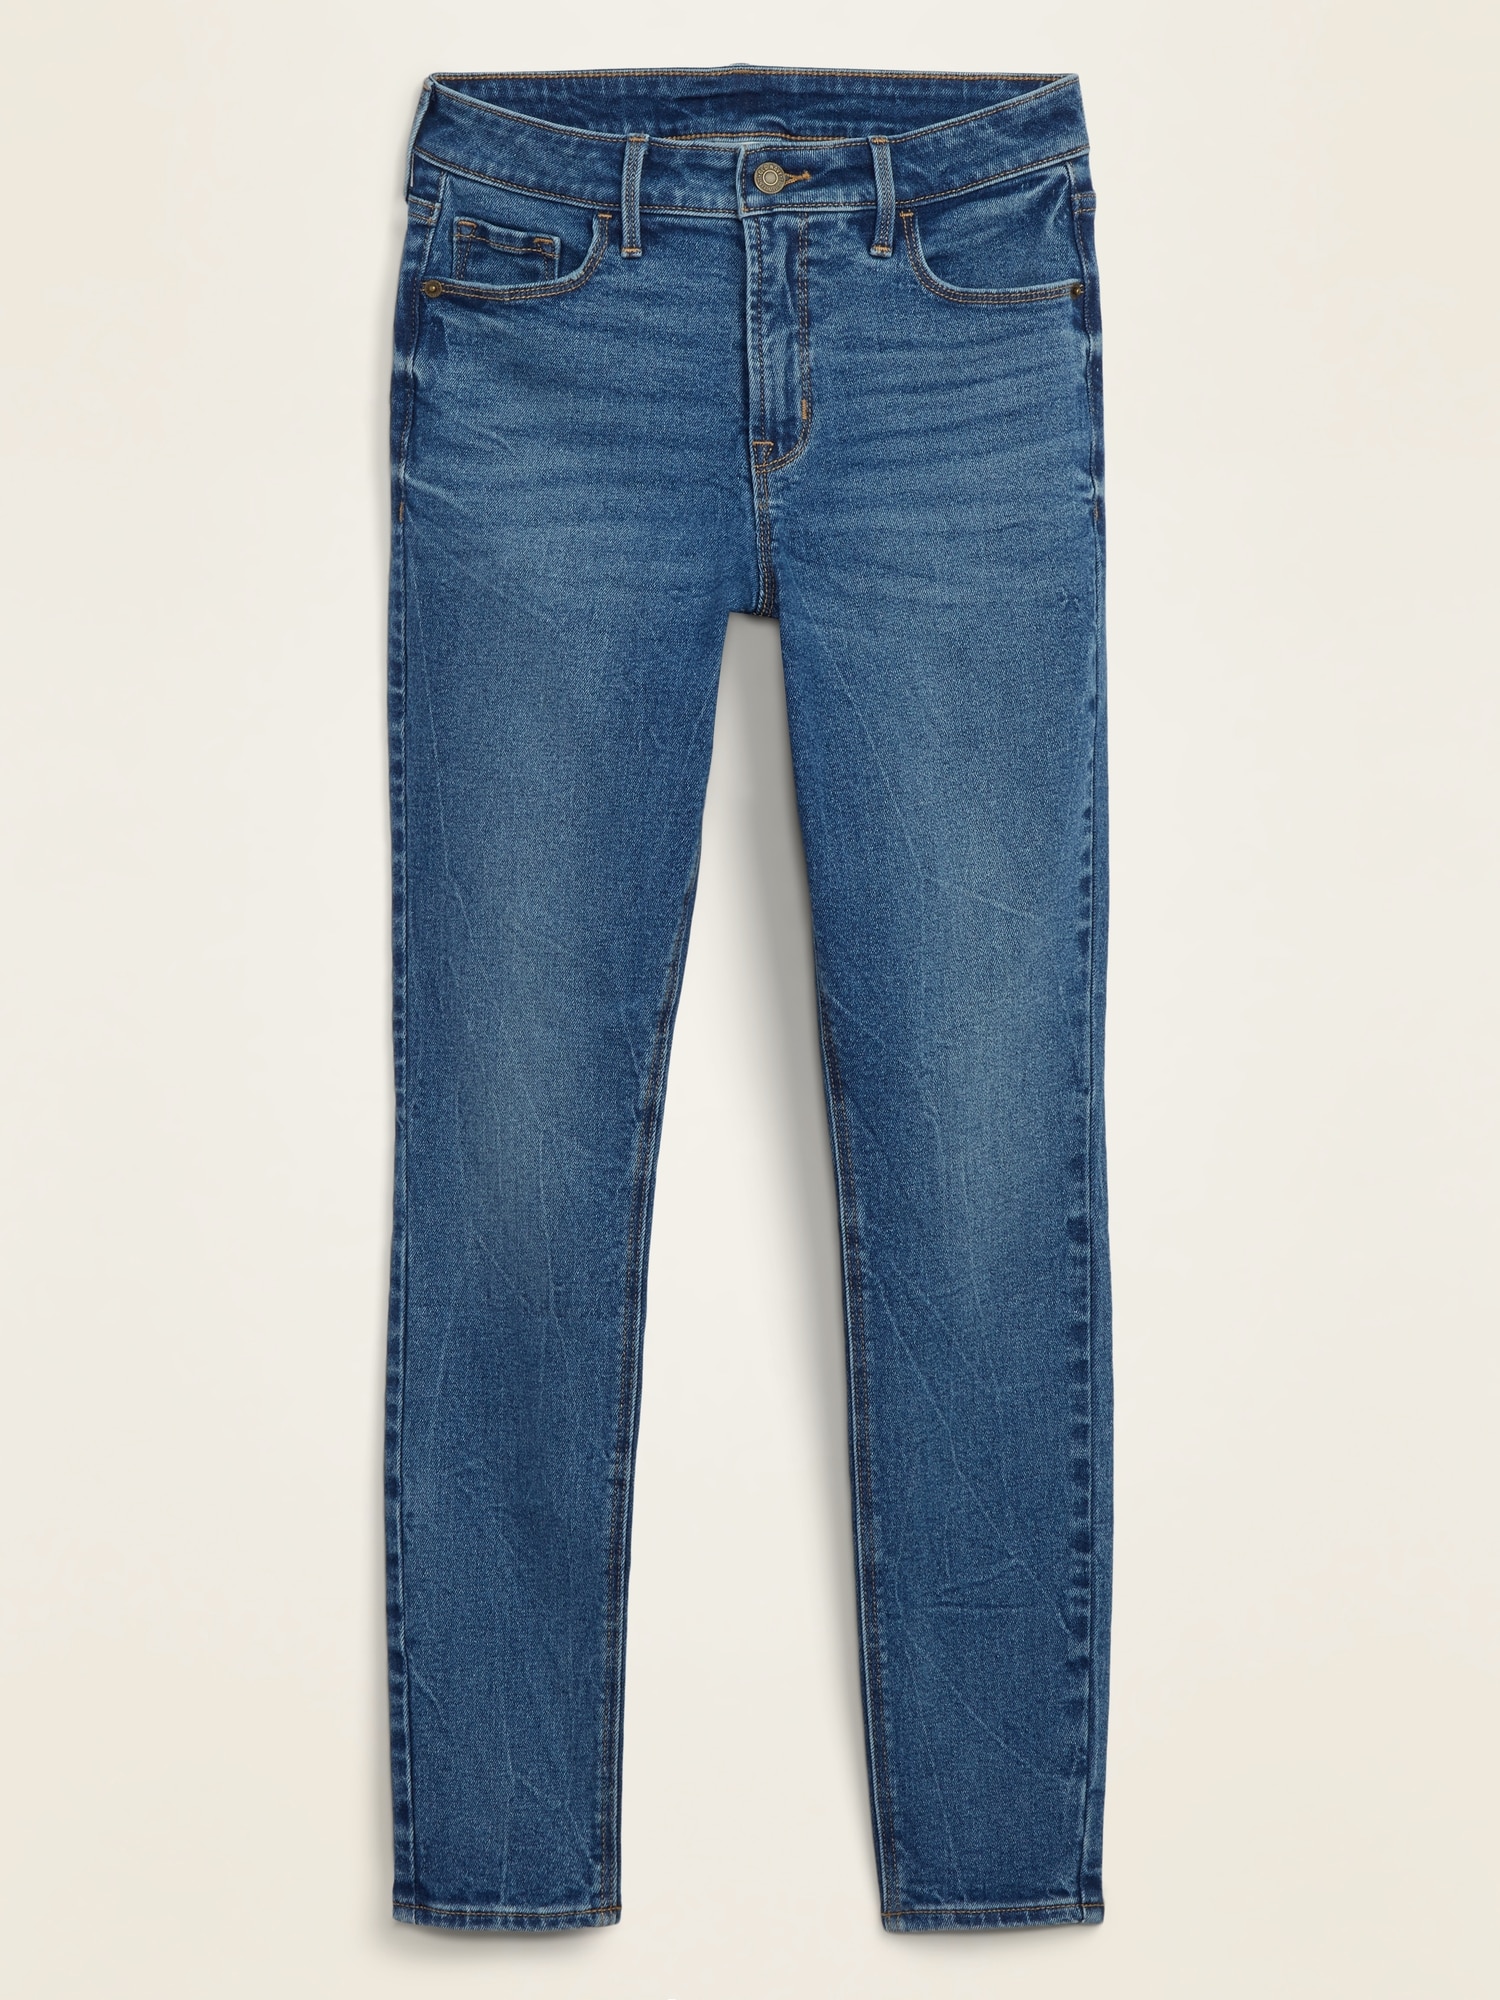 high waisted skinny jeans with belt loops